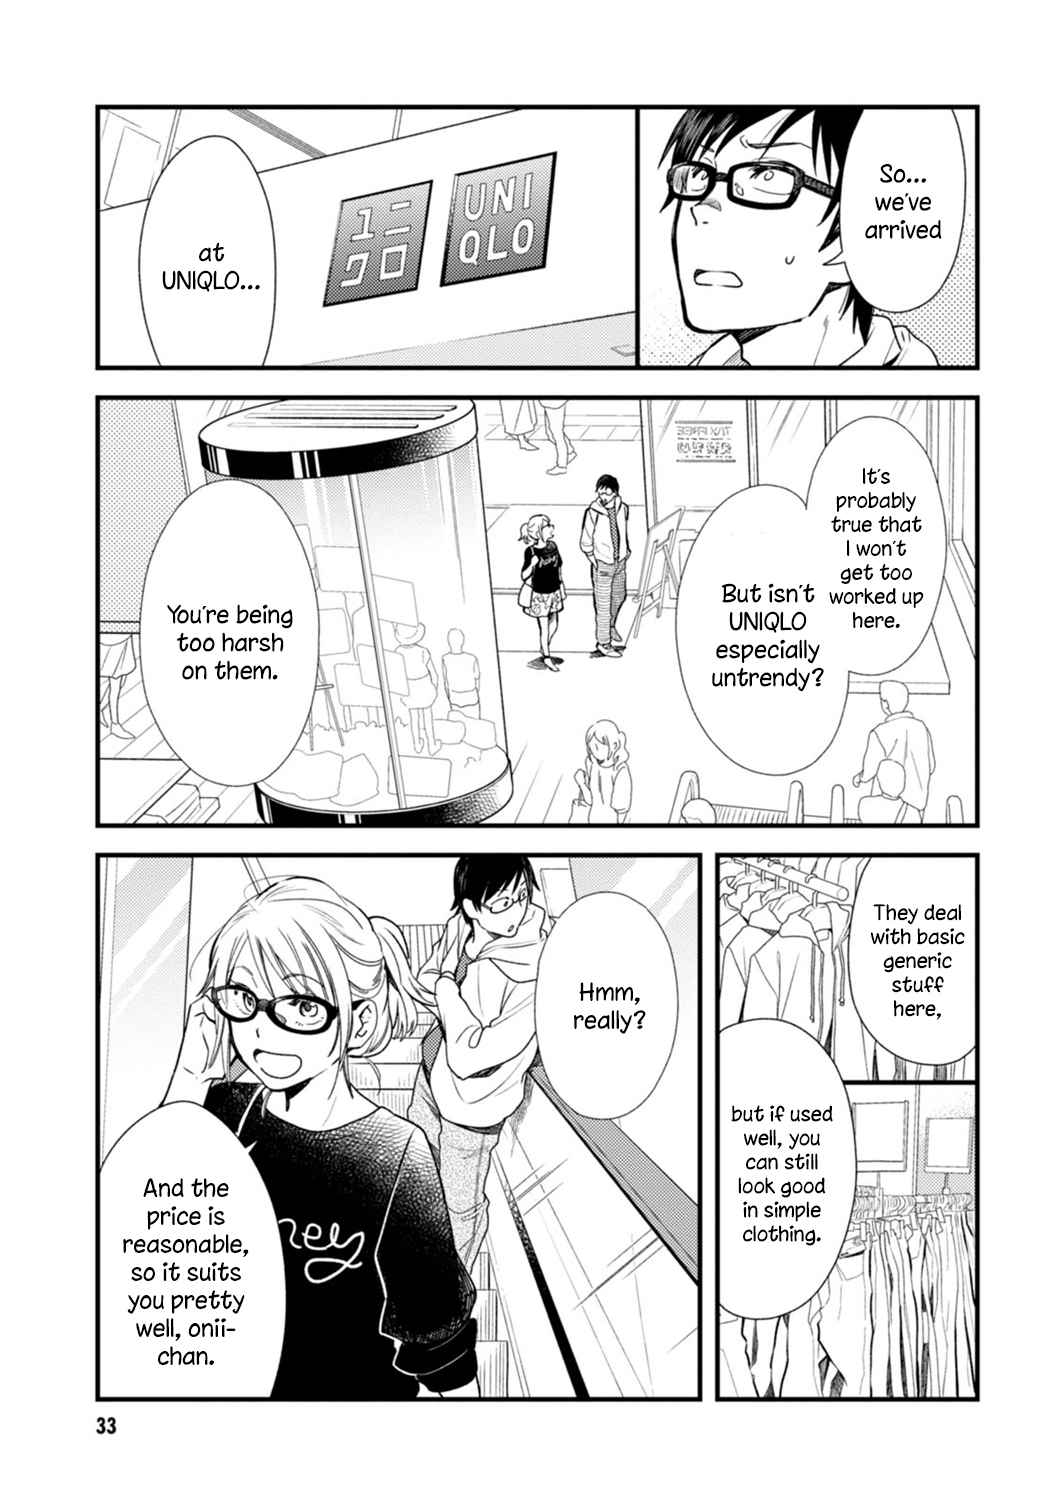 If You're Gonna Dress Up, Do It Like This Vol. 1 Ch. 2